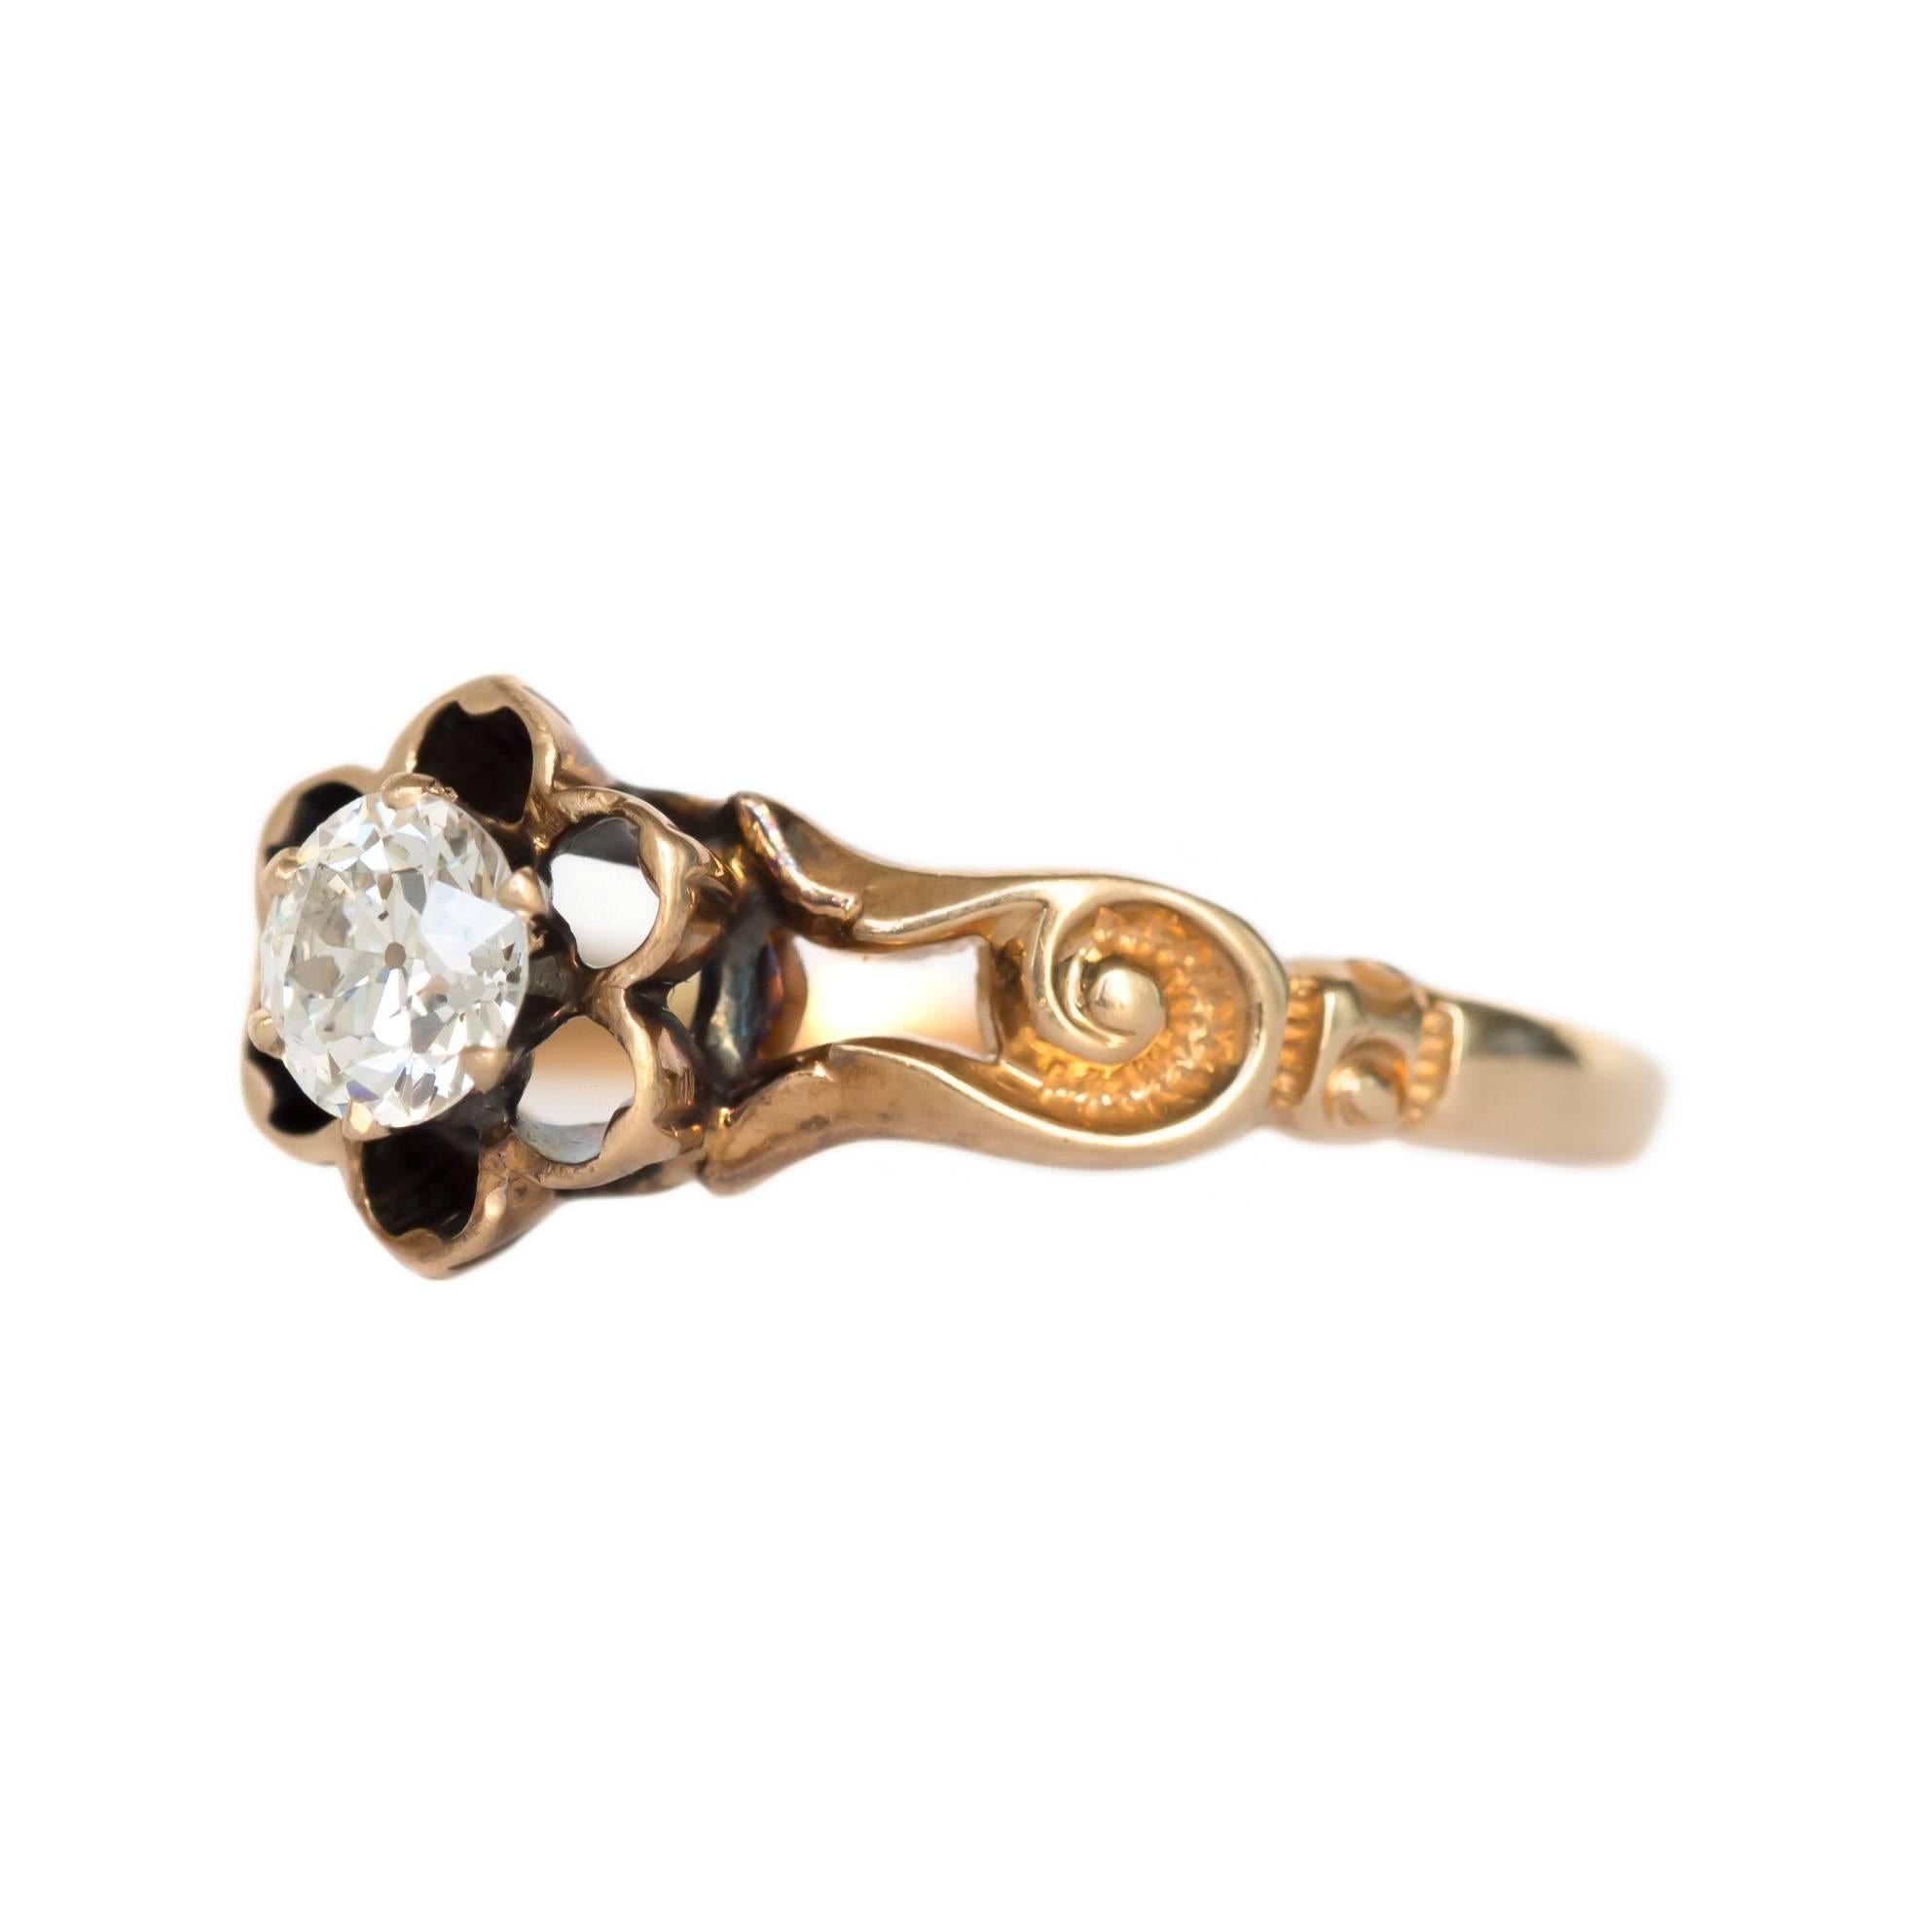 Item Details: 
Ring Size: 6.5
Metal Type: 9 Karat Yellow Gold
Weight: 2.7 grams

Center Diamond Details:
Shape: Old European Brilliant 
Carat Weight: .33 carat
Color: J
Clarity: VS

Finger to Top of Stone Measurement: 5.8mm